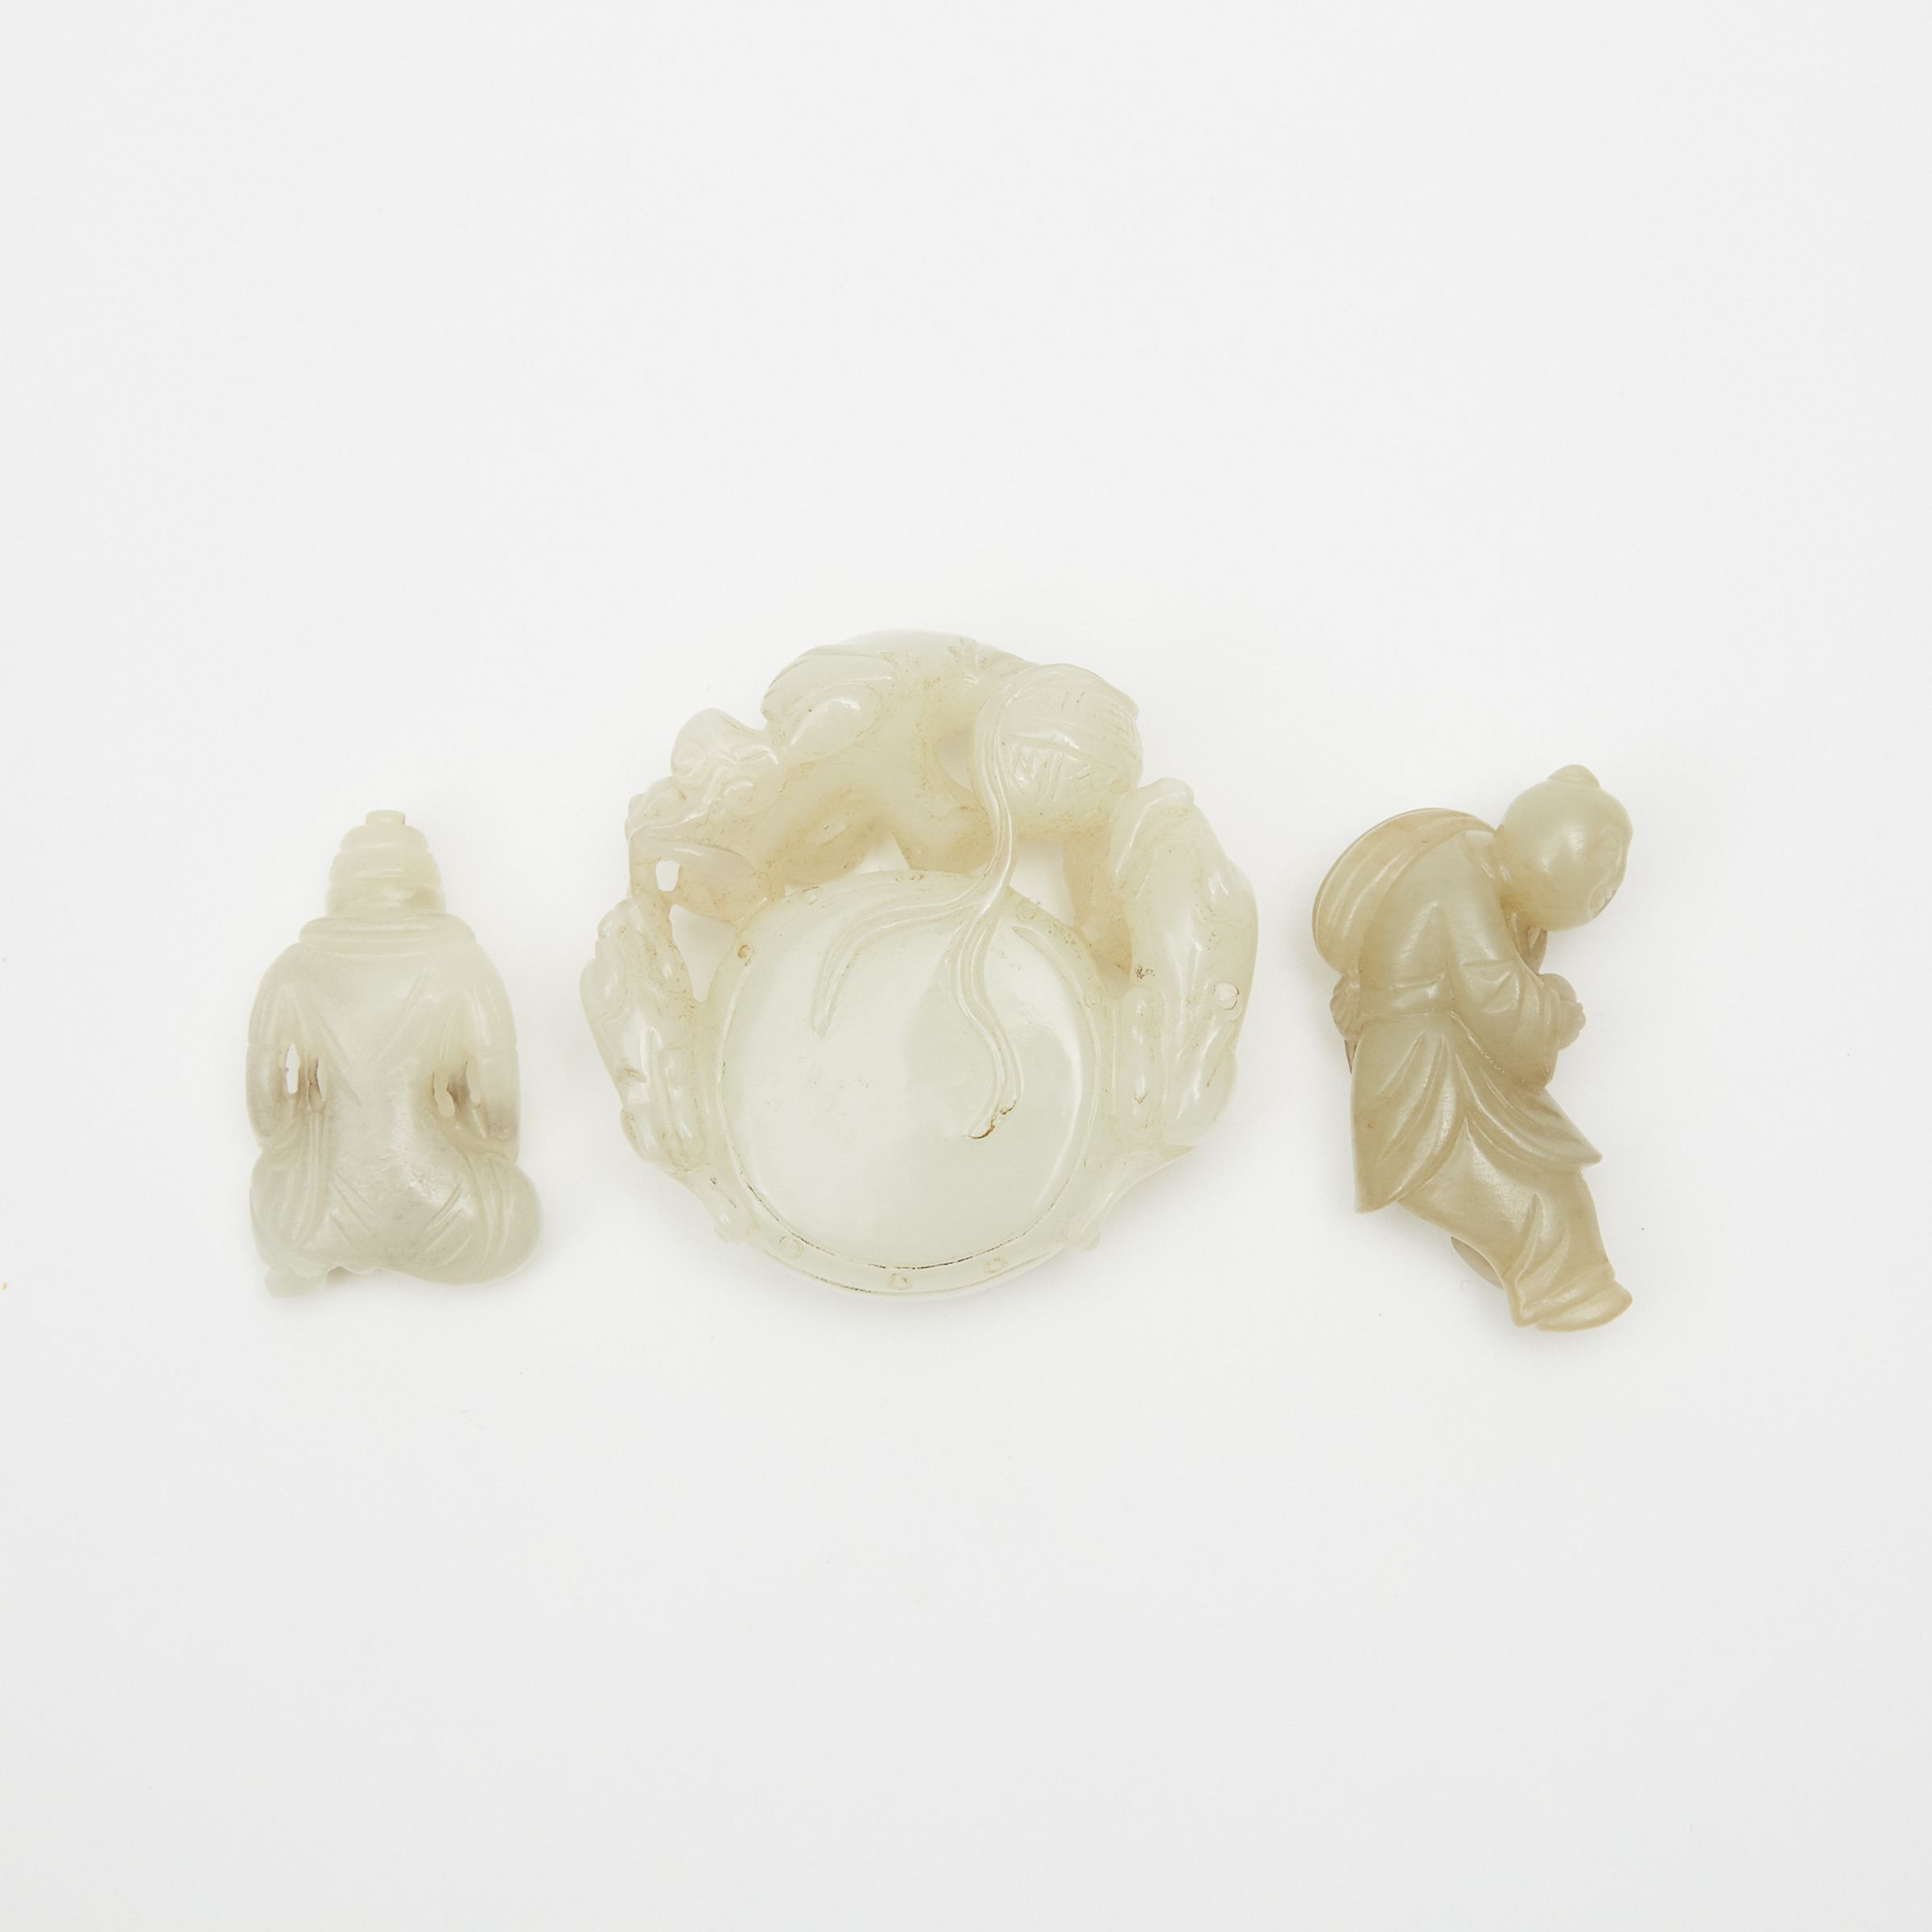 A White Jade Carved 'Immortal Boy' Group and Two Jade Carved Figures